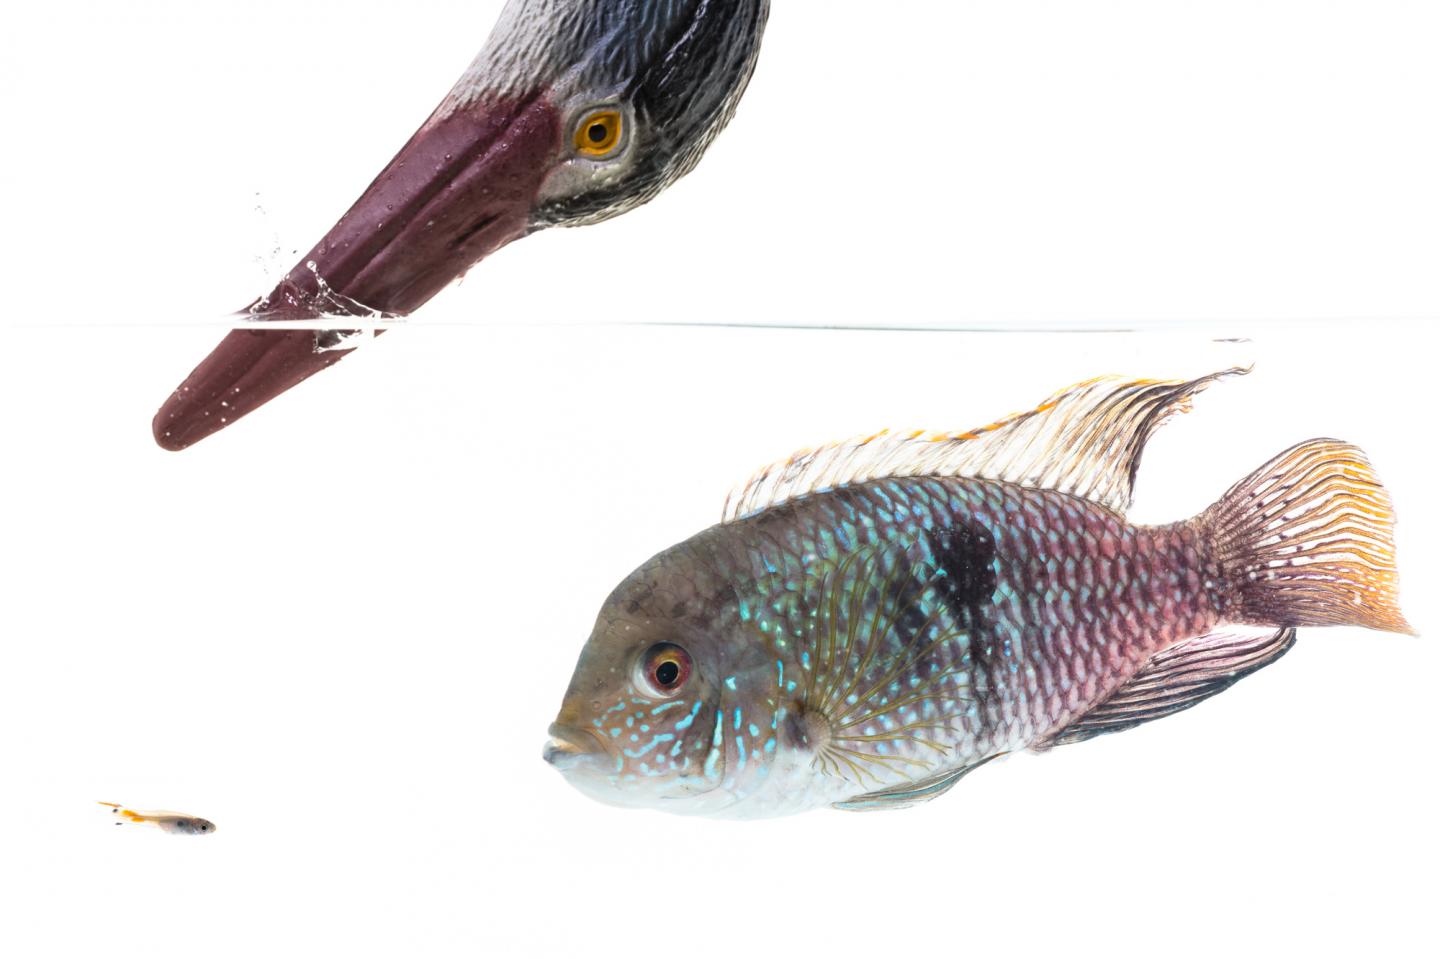 A Mock-Up Image Showing a Trinidadian Guppy, a Blue Acara Cichlid and a Model of a Heron